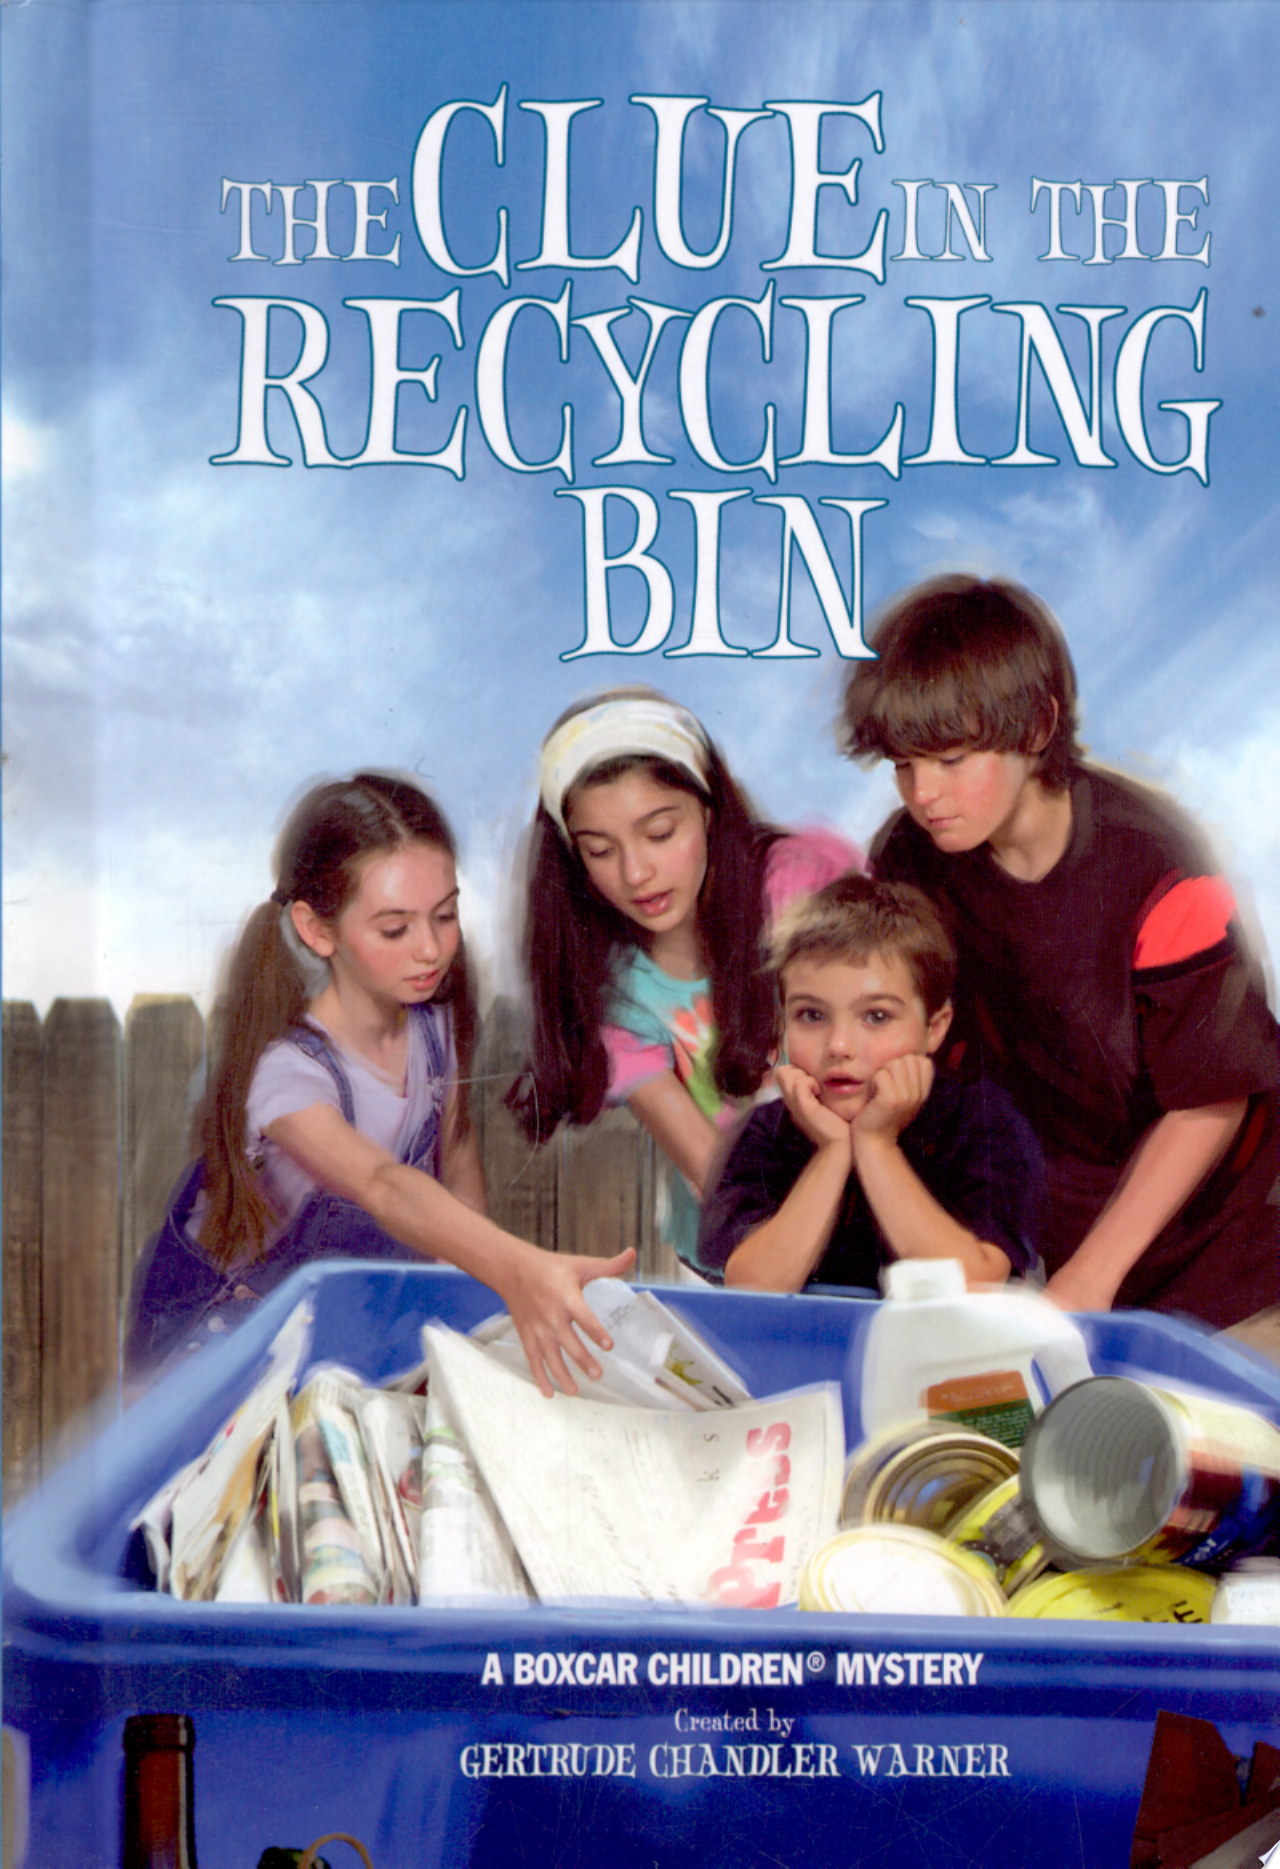 Image for "The Clue in the Recycling Bin"